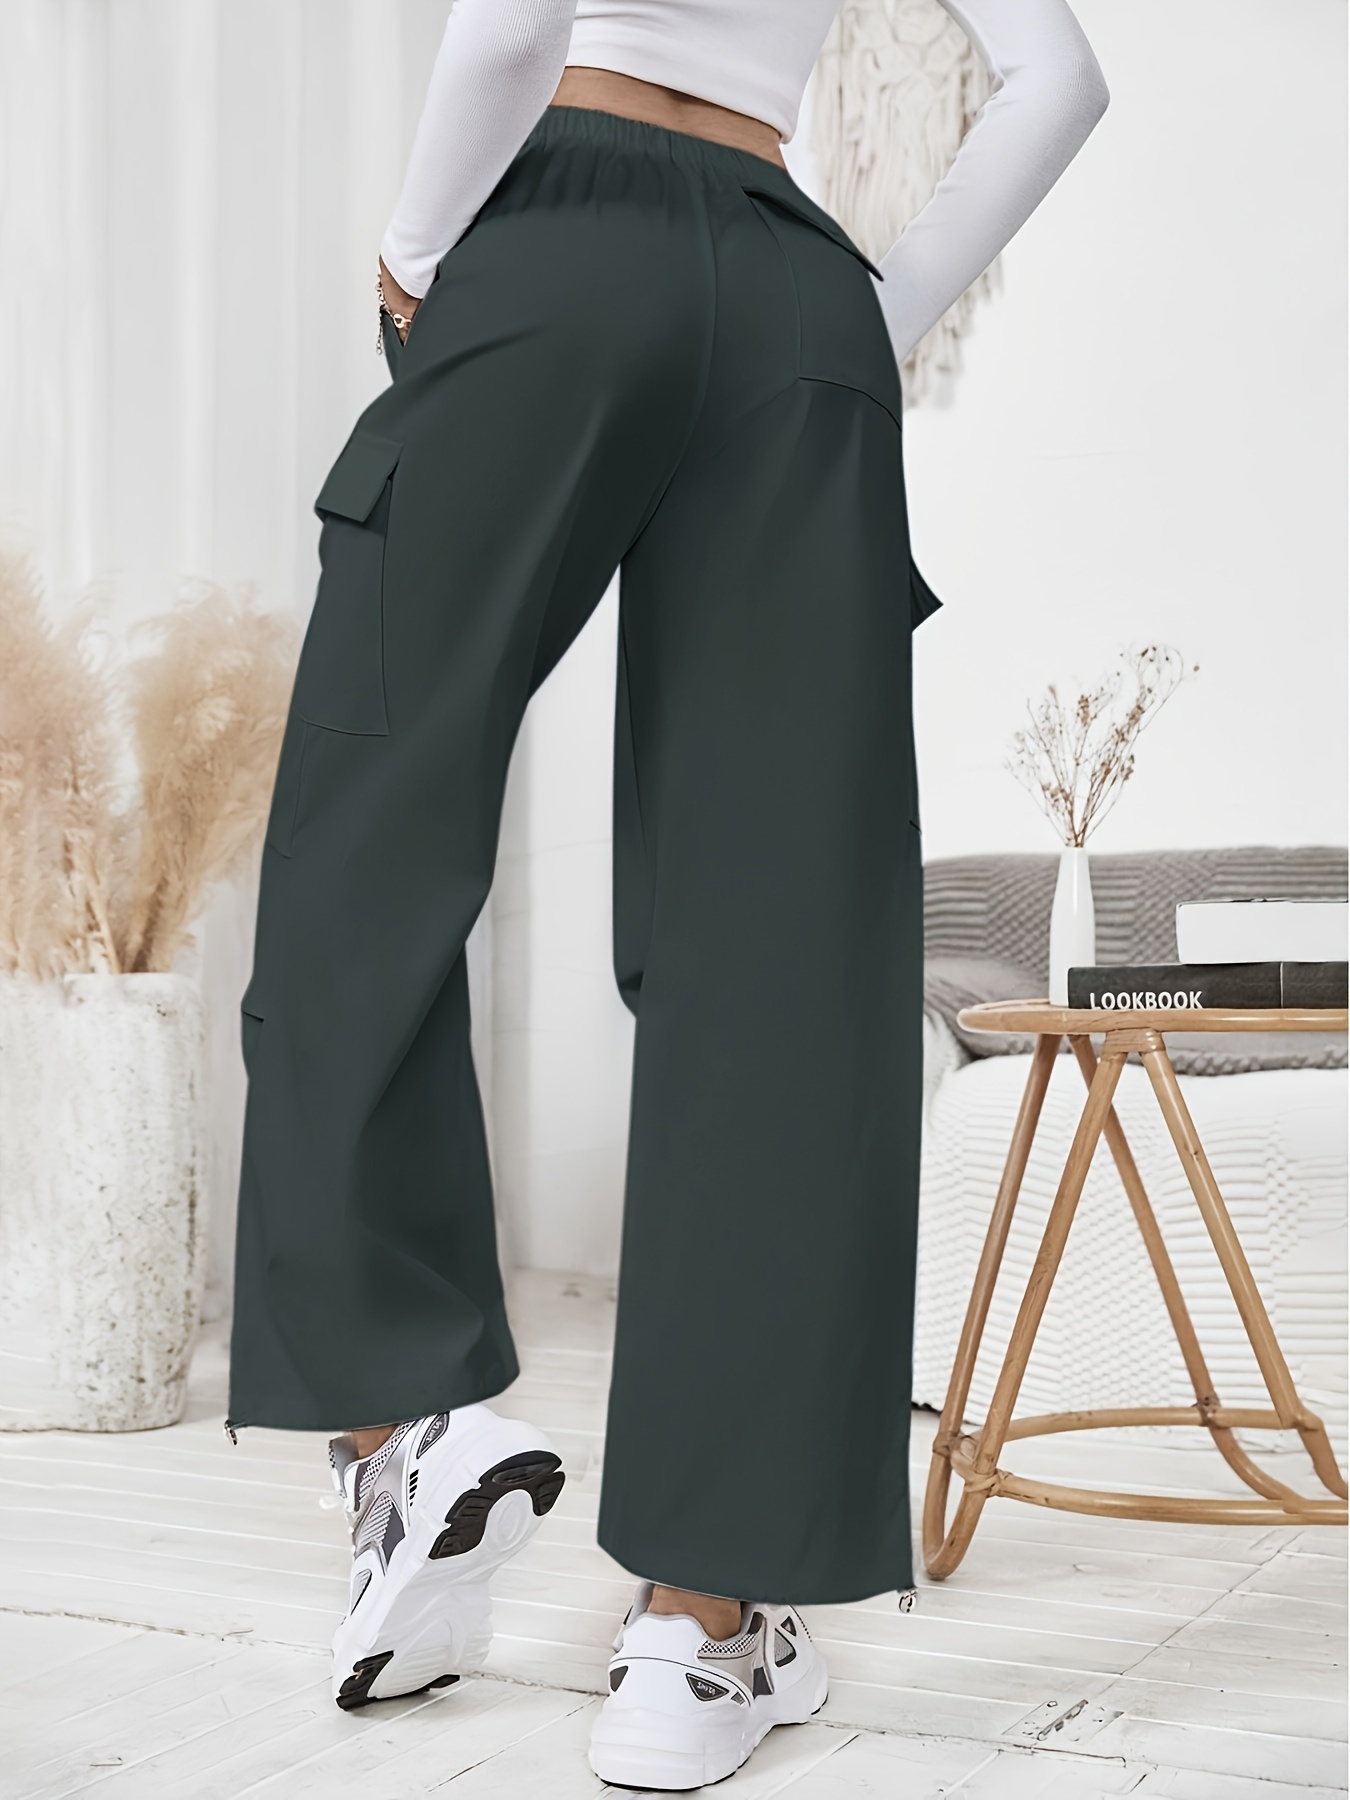 Dokotoo Ladies Cargo Pants Wide Leg High Waisted with Pockets Comfy Casual 10  Pants Loravel Trouser Plus Size Utility Cargo Y2K Dress ikTravel Trouser  Plus Size Cargo Streetwead Plus Size Apricot at